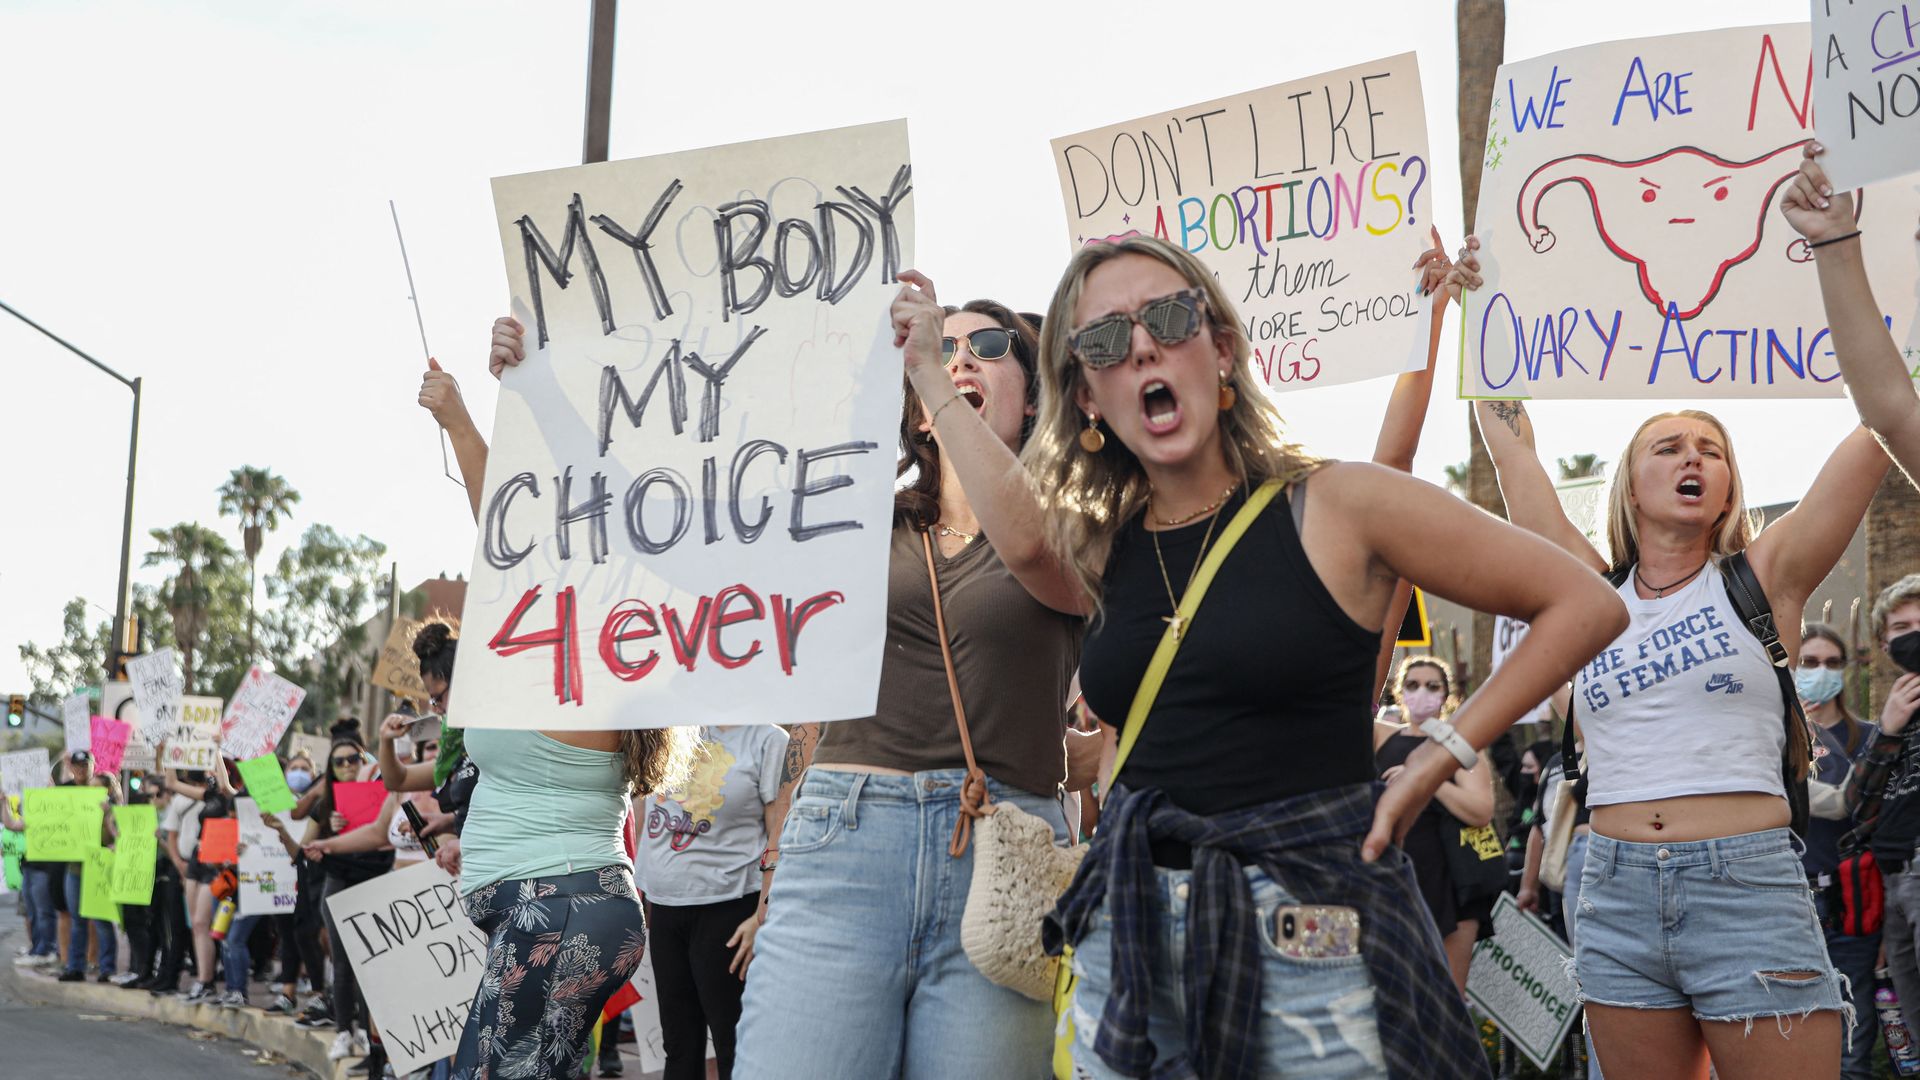 Picture of abortion rights protesters holding signs that say "my body my choice 4ever"